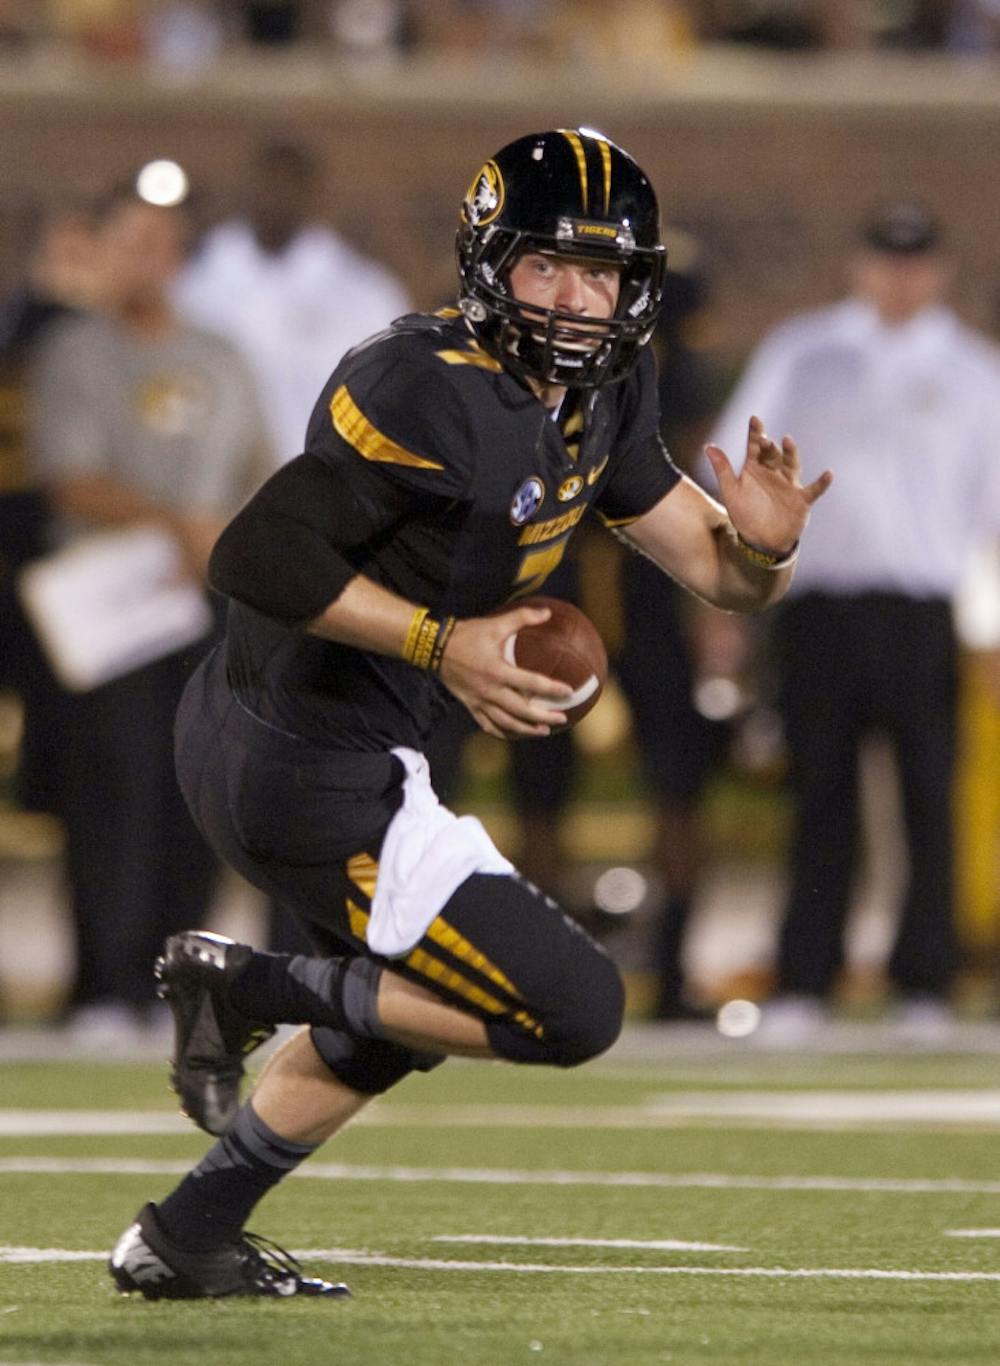 <p>Missouri quarterback Maty Mauk looks for a receiver during the fourth quarter his team's 58-14 win against Murray State in Columbia, Mo., on Aug. 31.</p>